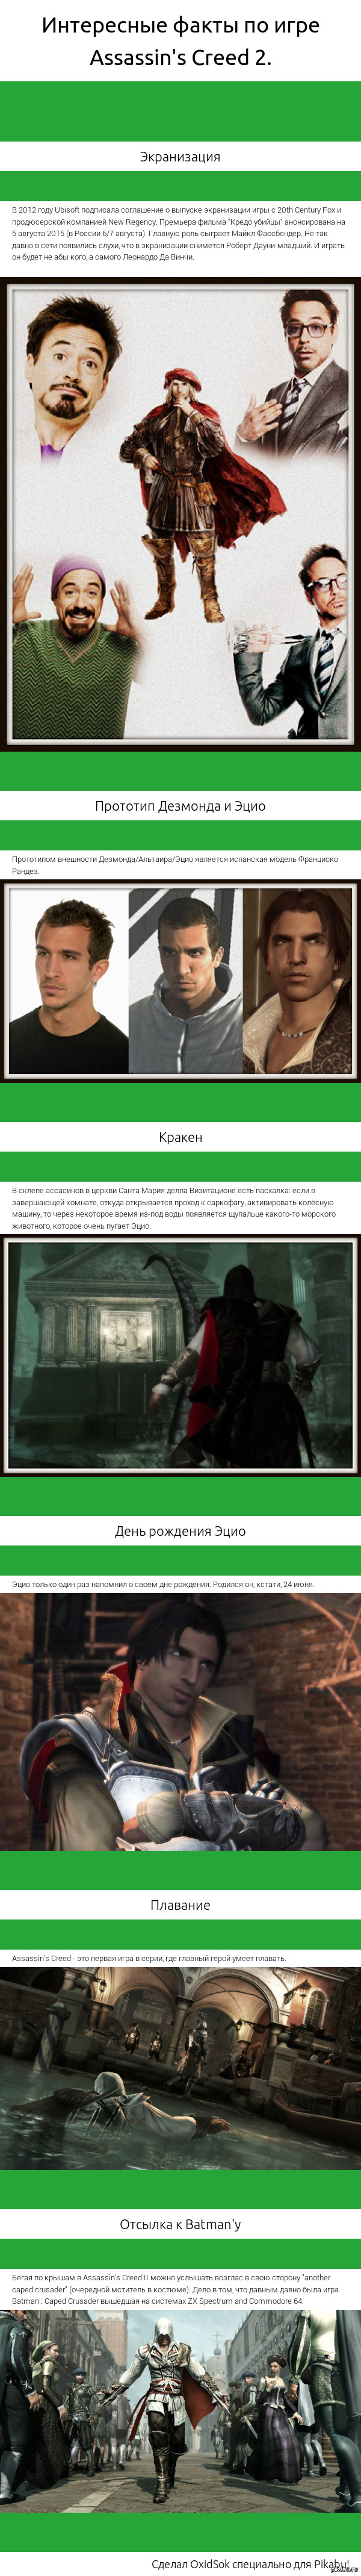     Assassin's Creed 2. ,    *  ,  6   *,      .